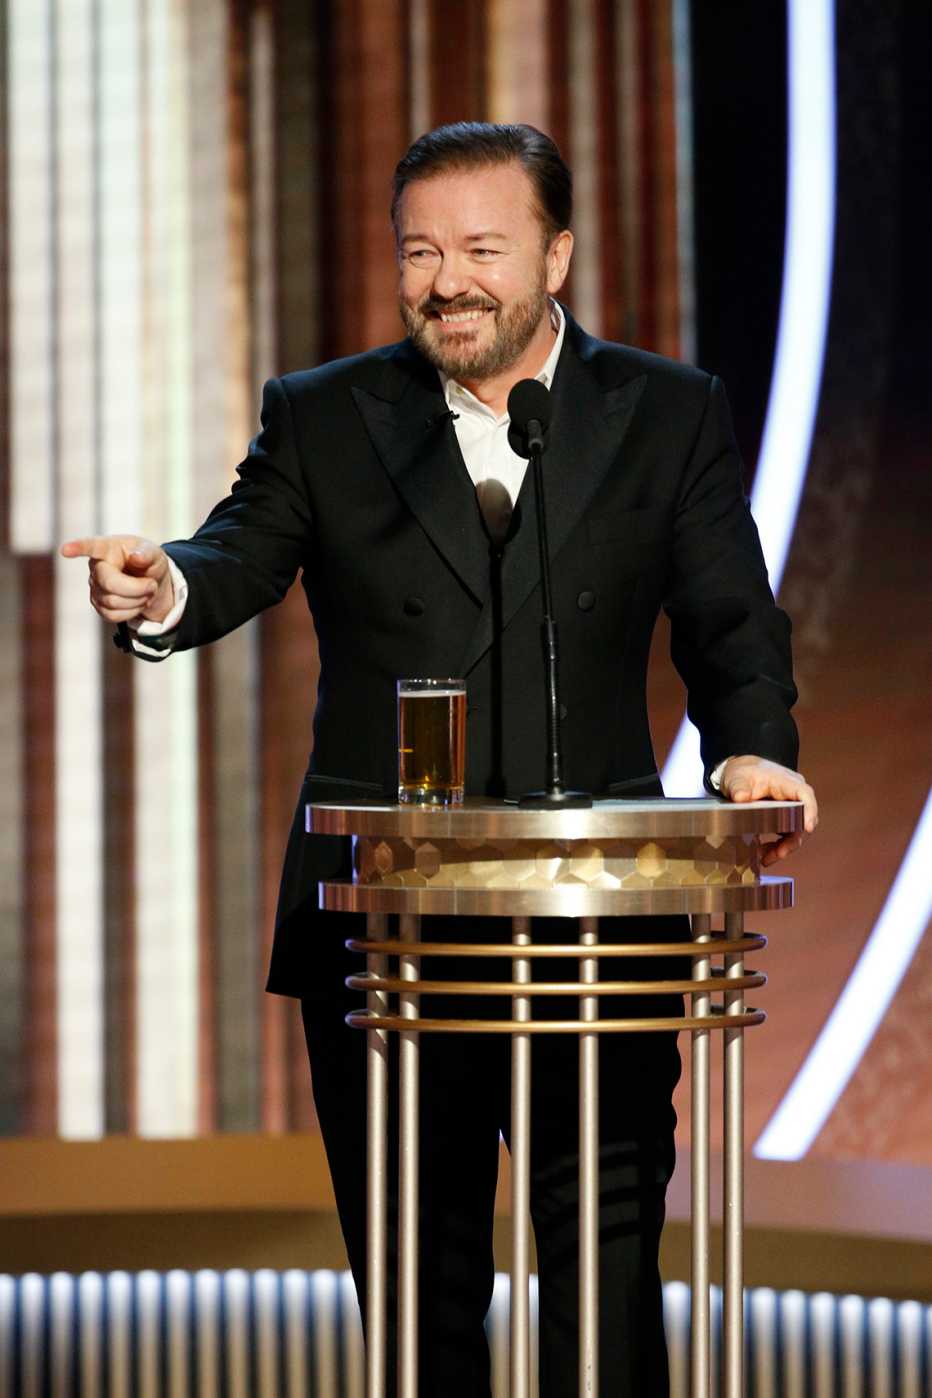 Ricky Gervais onstage hosting the 77th Annual Golden Globe Awards